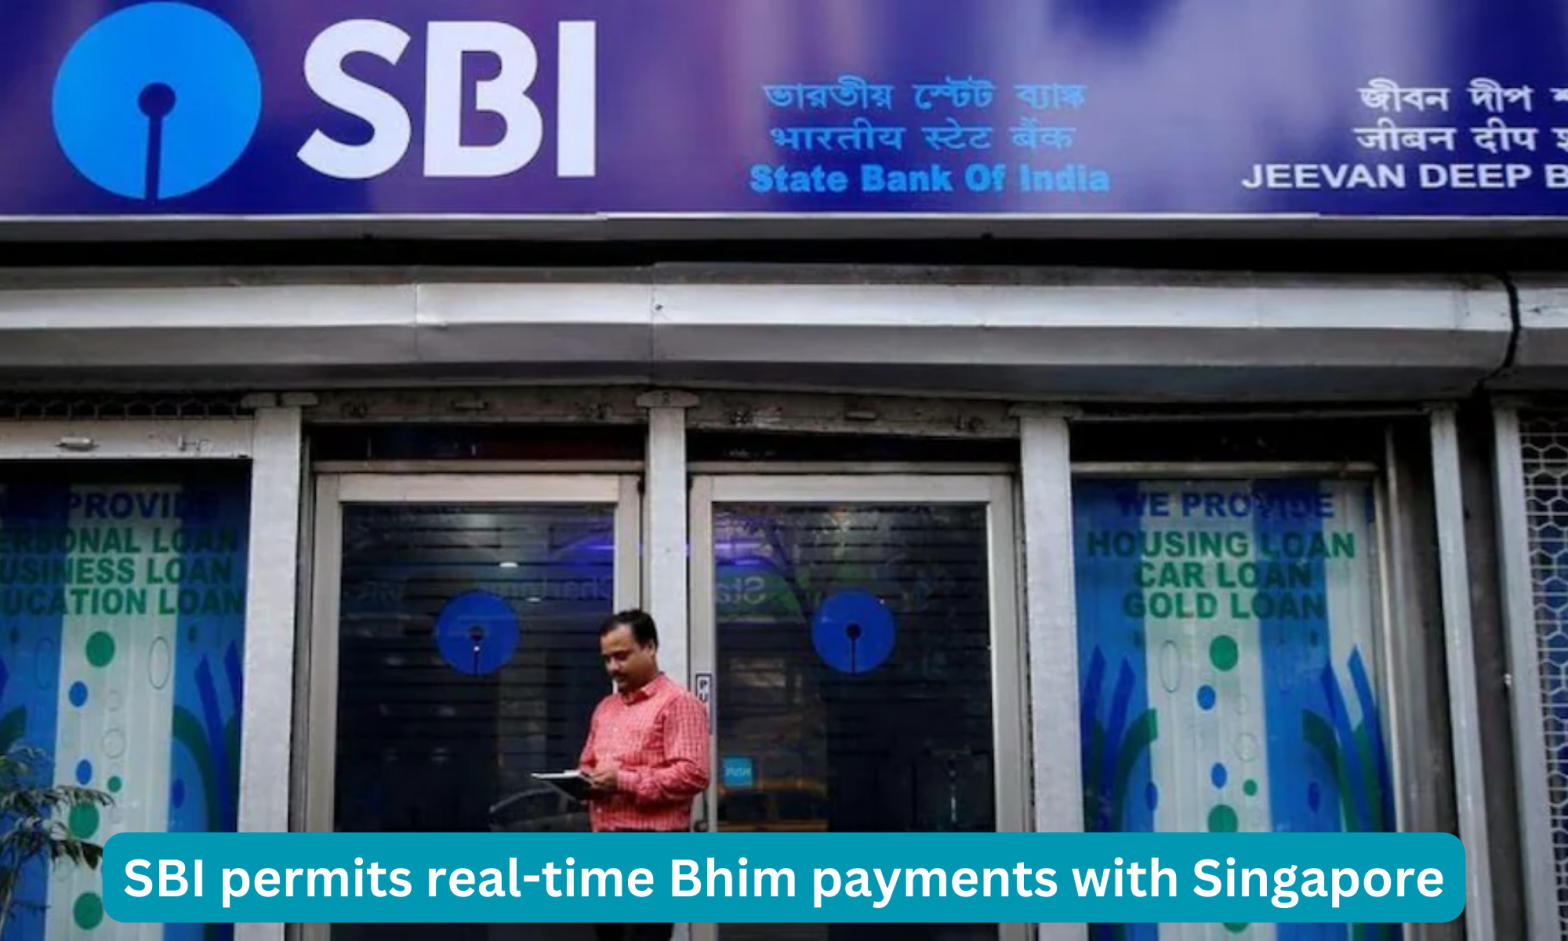 SBI permits real-time Bhim payments with Singapore